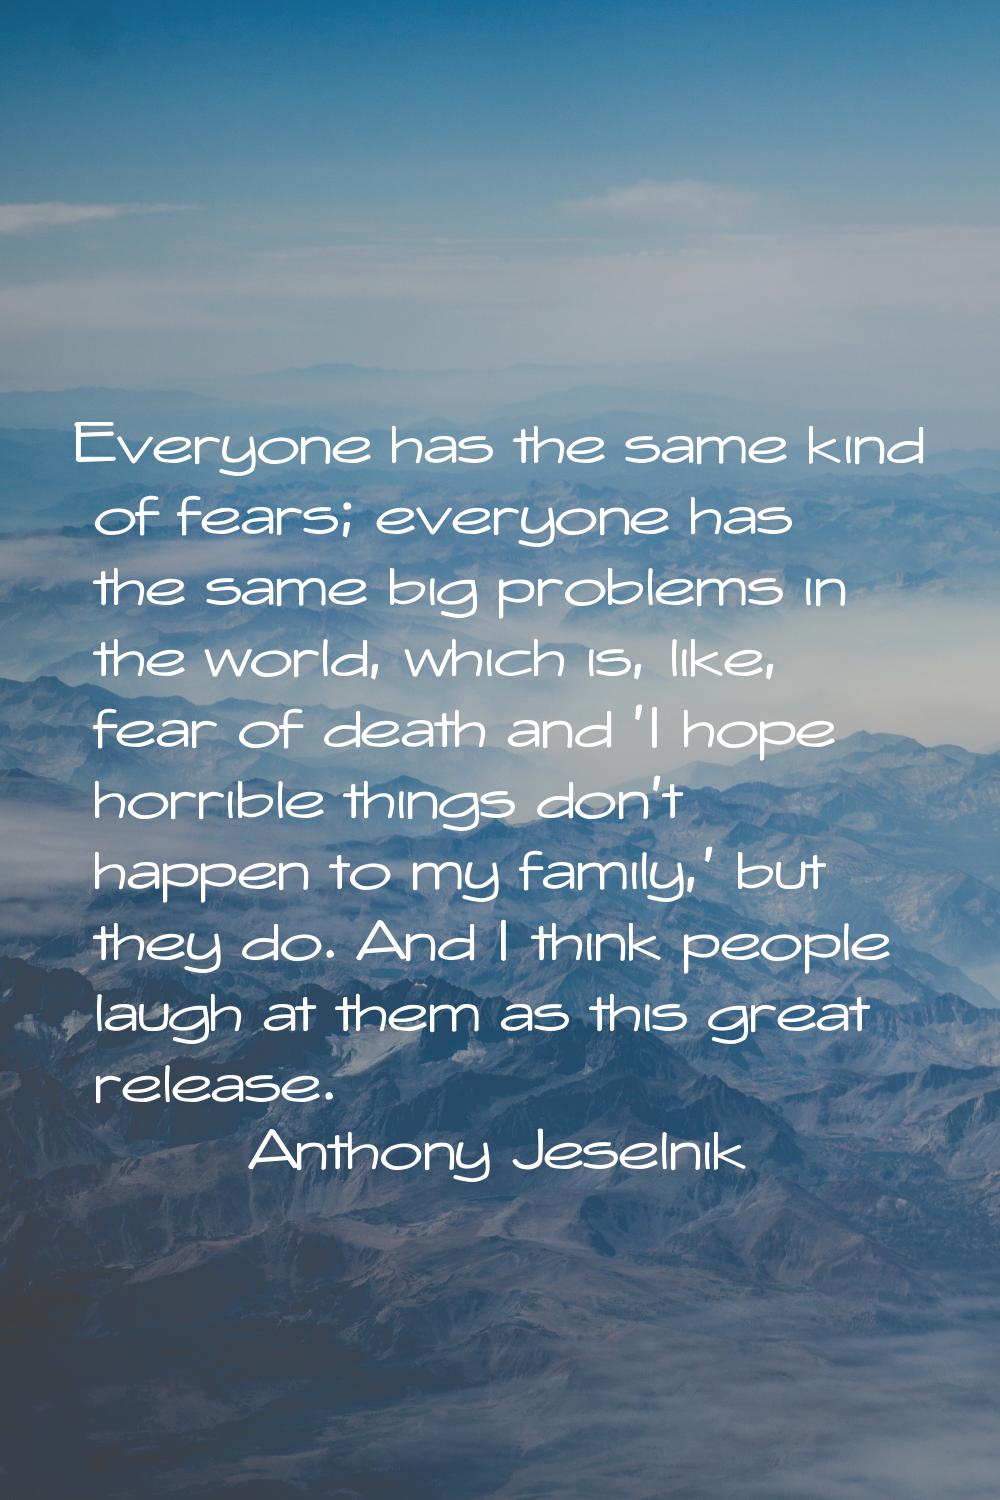 Everyone has the same kind of fears; everyone has the same big problems in the world, which is, lik